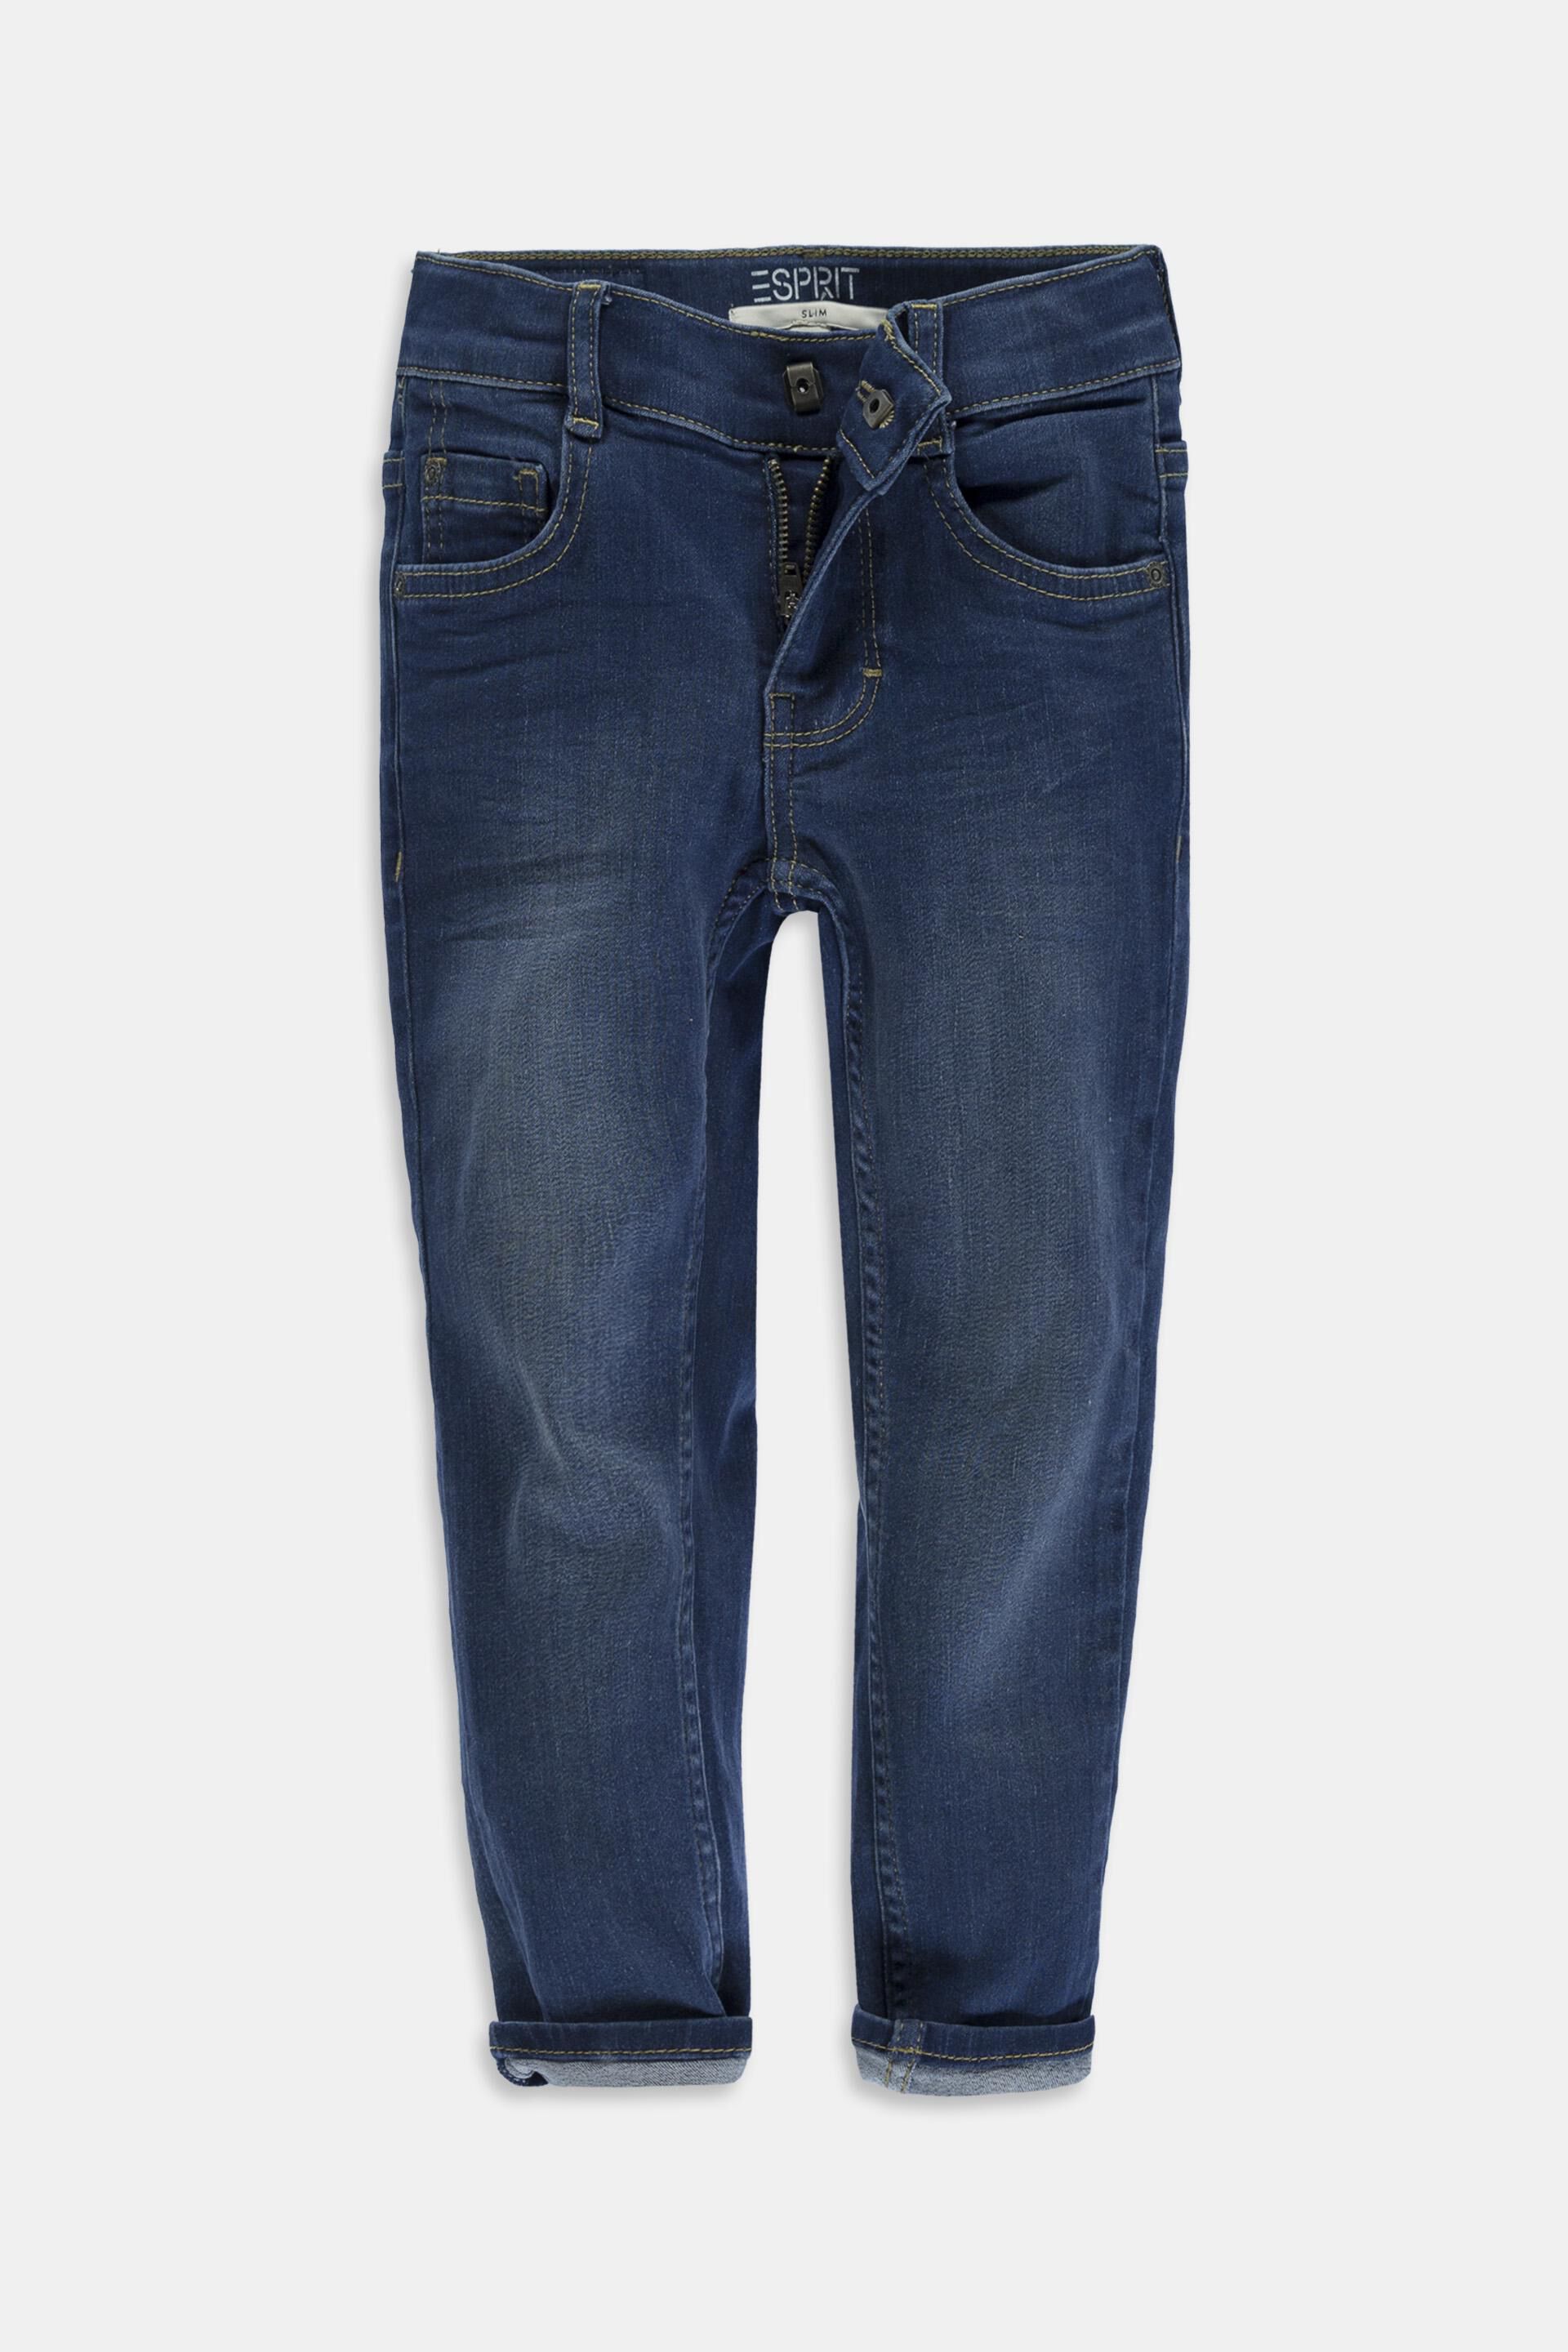 Esprit Teppich Washed stretch jeans with an adjustable waistband